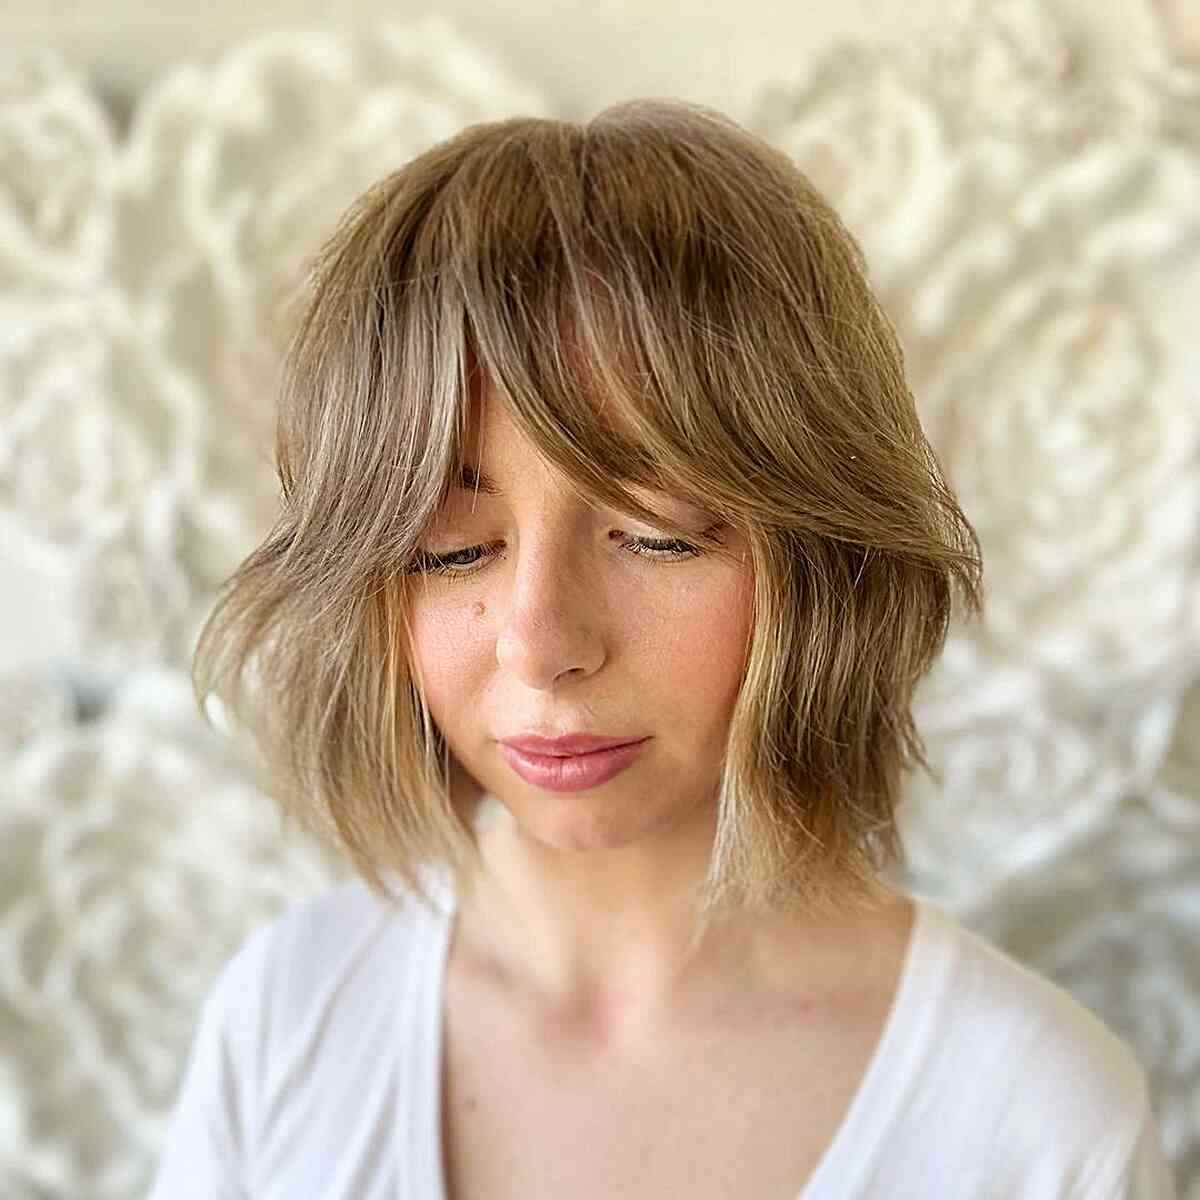 Cool Fall Trend: 46 Textured Bobs You Have to See